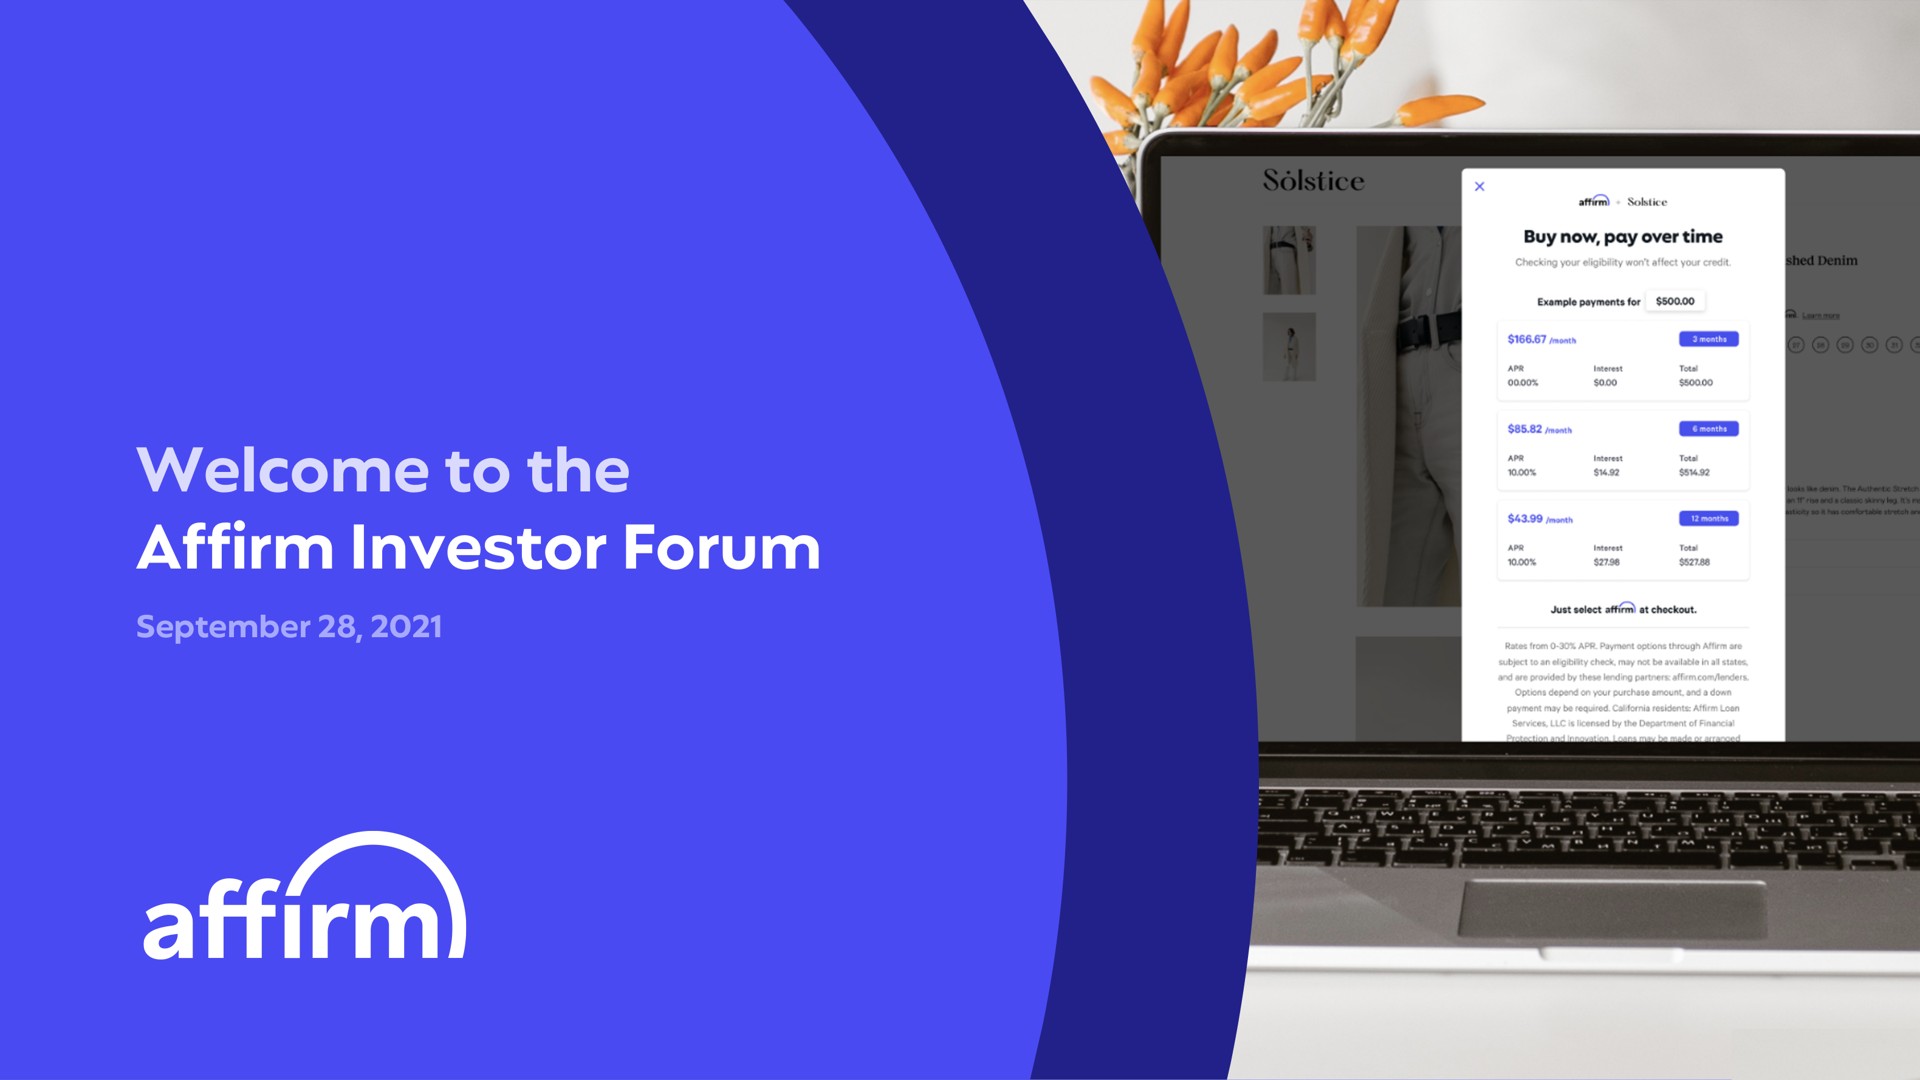 welcome to the affirm investor forum | Affirm